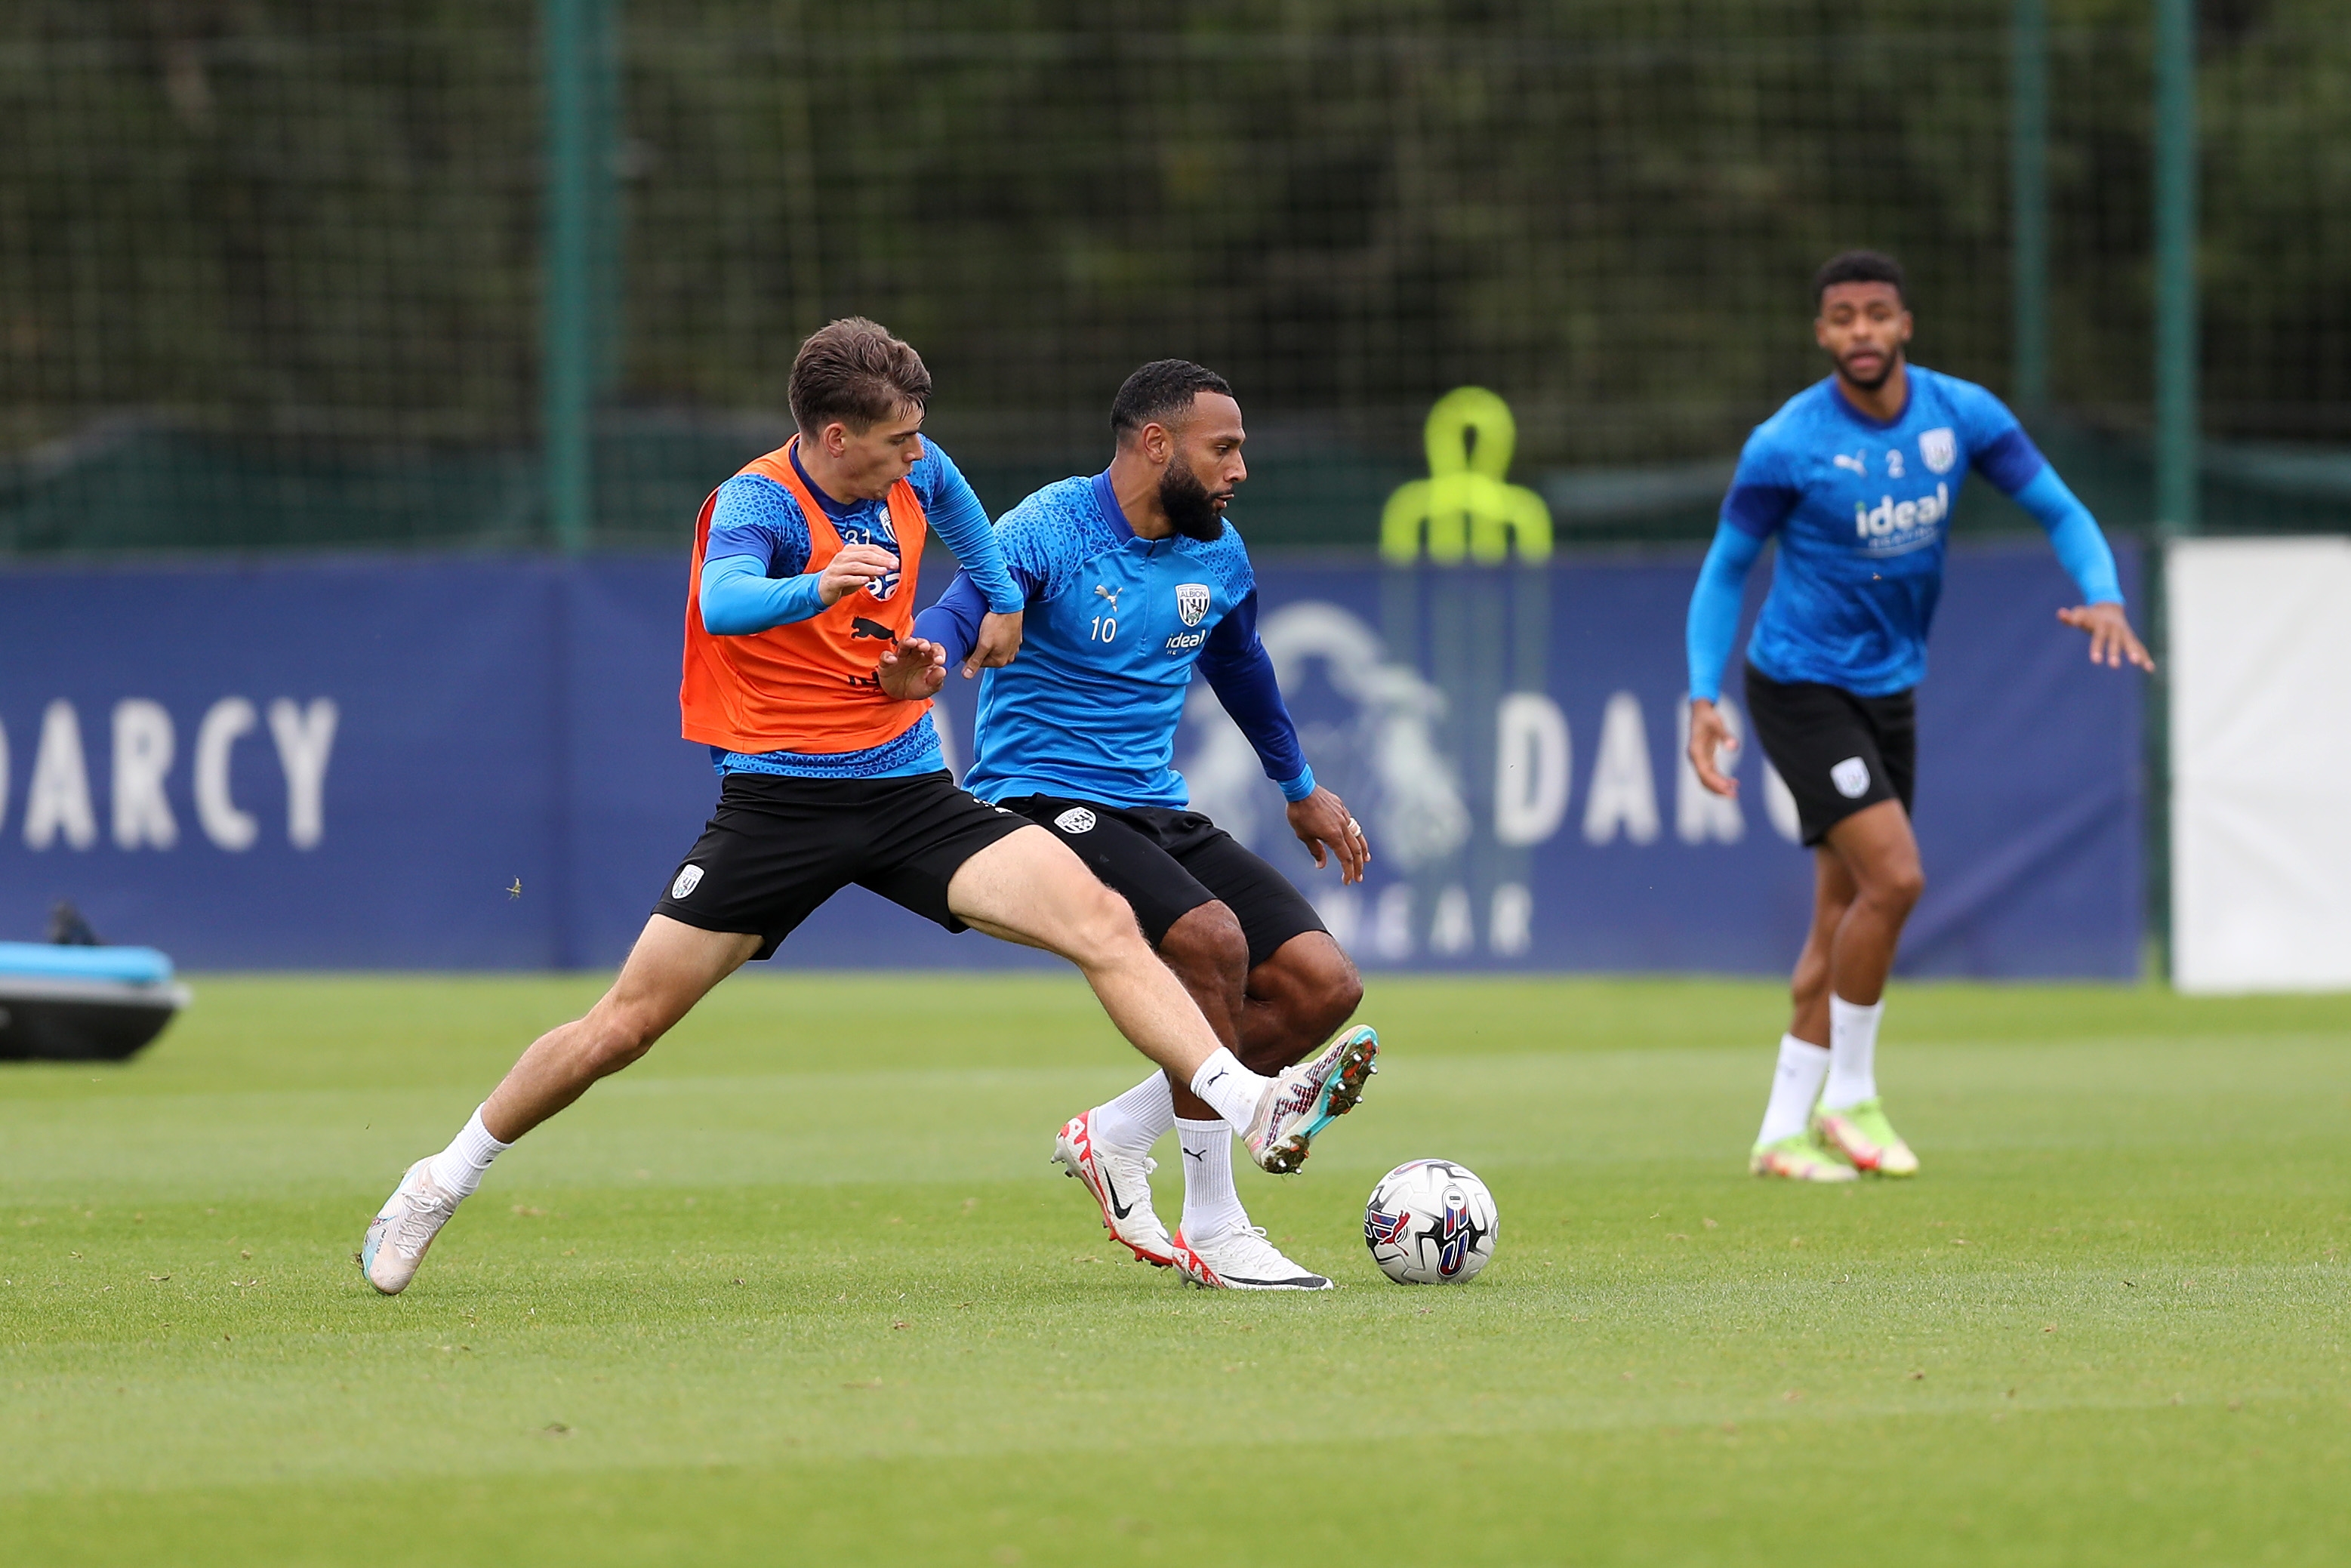 Albion players in training.